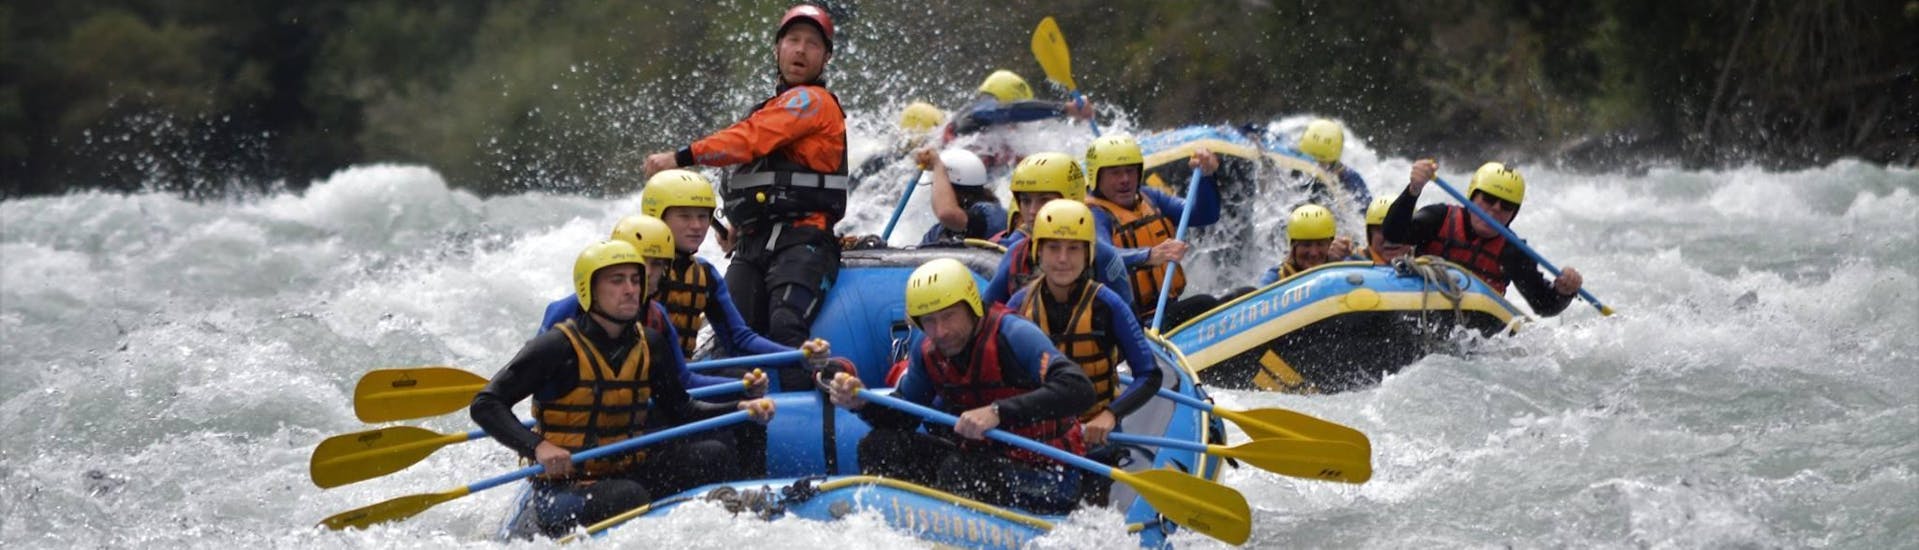 During the Rafting "Extreme Tour" on the Sanna, a certified rafting guide from WhyNot Adventures is commanding his rafting crew whilst tackling very challenging river section.  